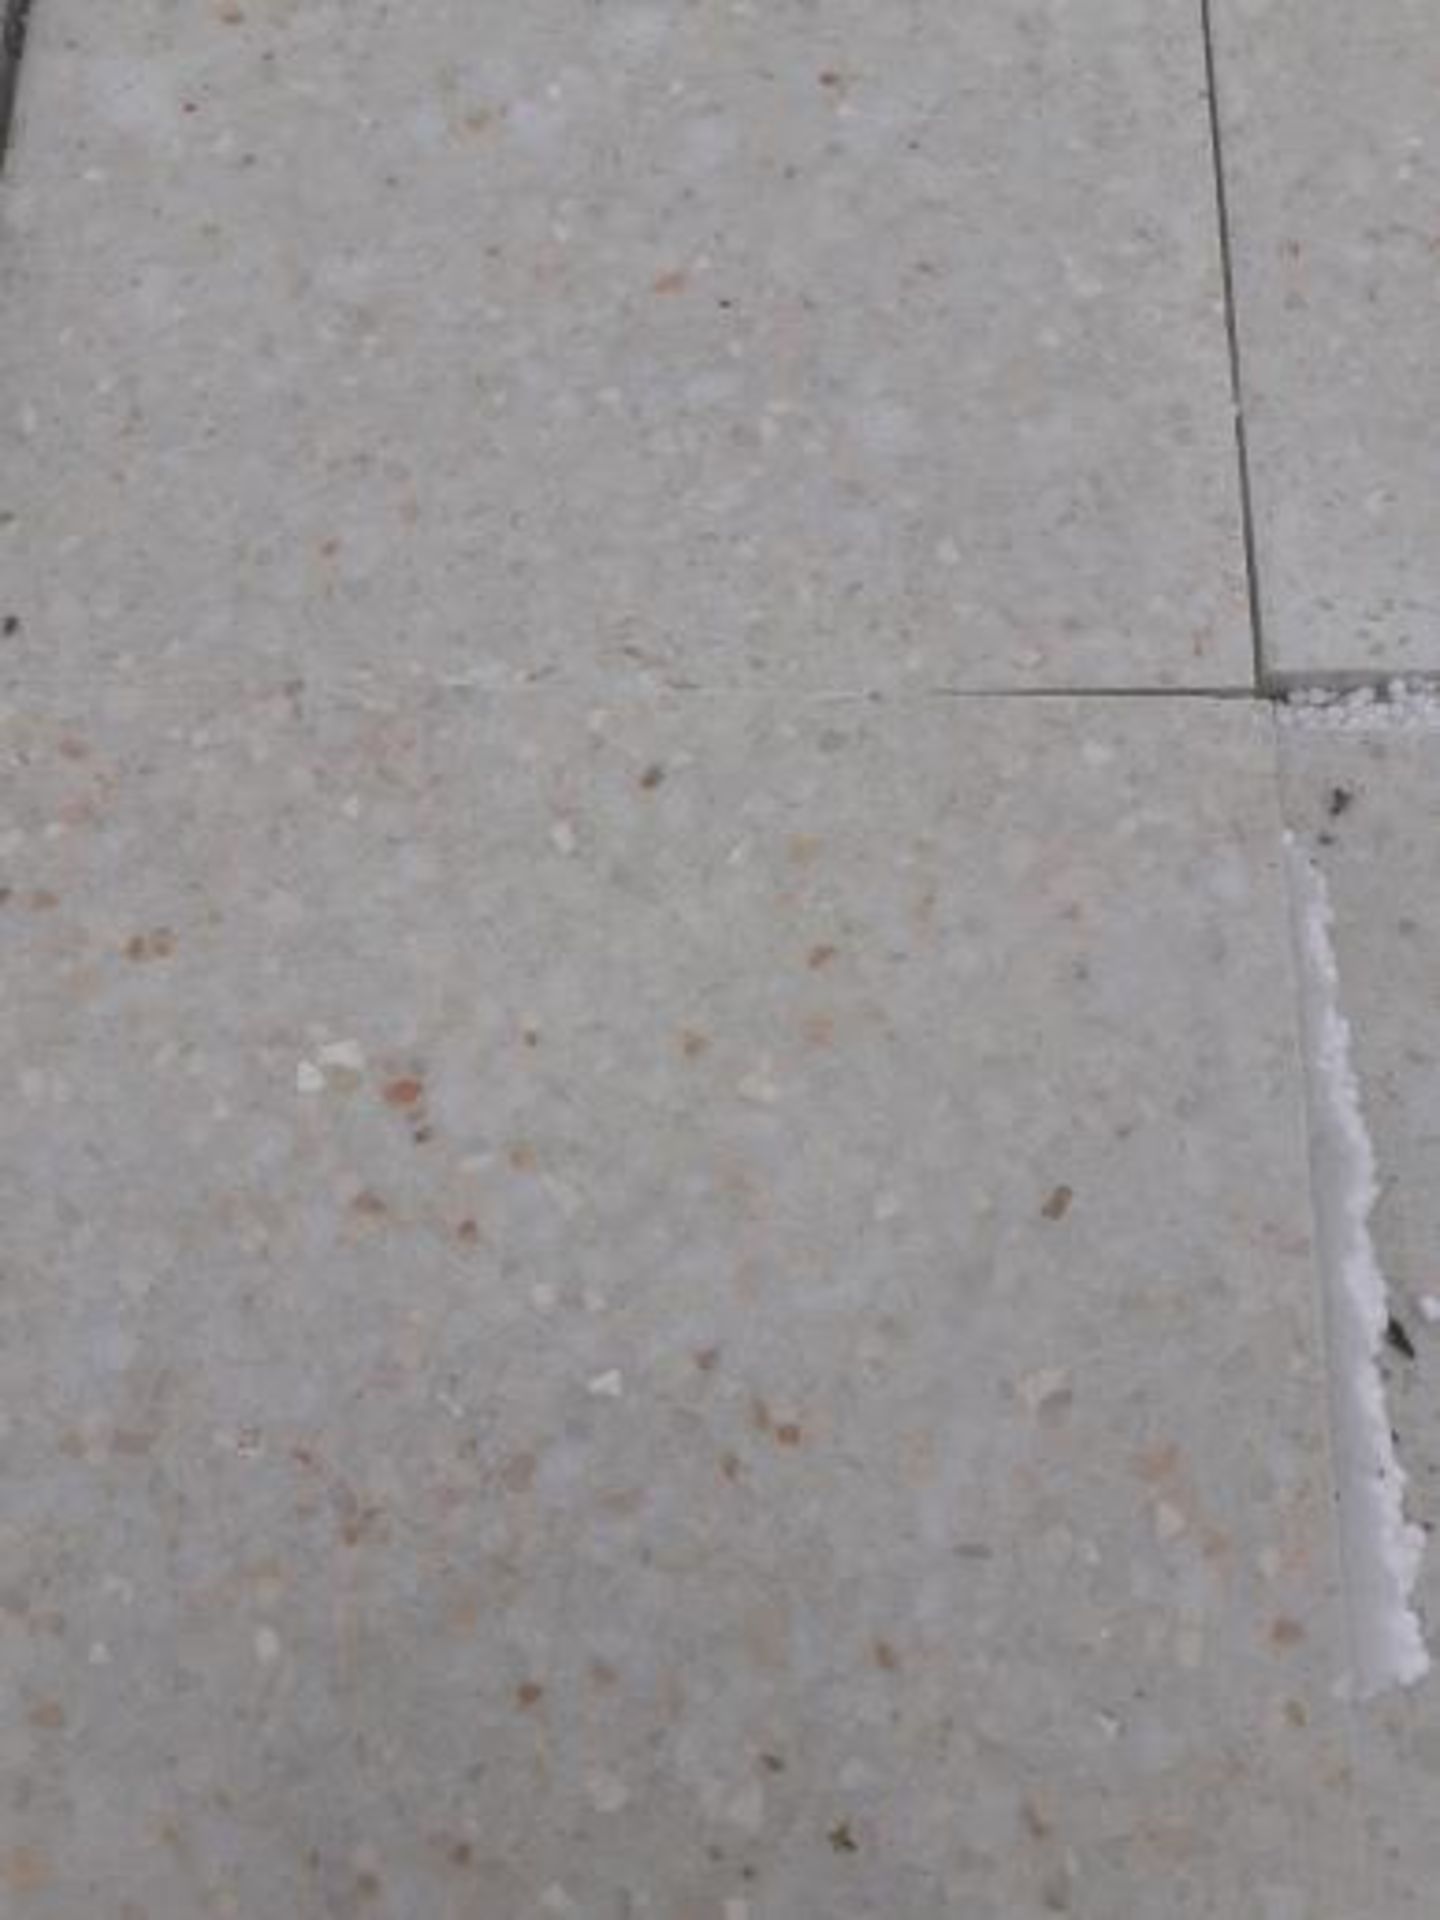 1 PALLET OF BRAND NEW TERRAZZO COMMERCIAL FLOOR TILES (Z30011), COVERS 24 SQUARE YARDS *PLUS VAT* - Image 5 of 14